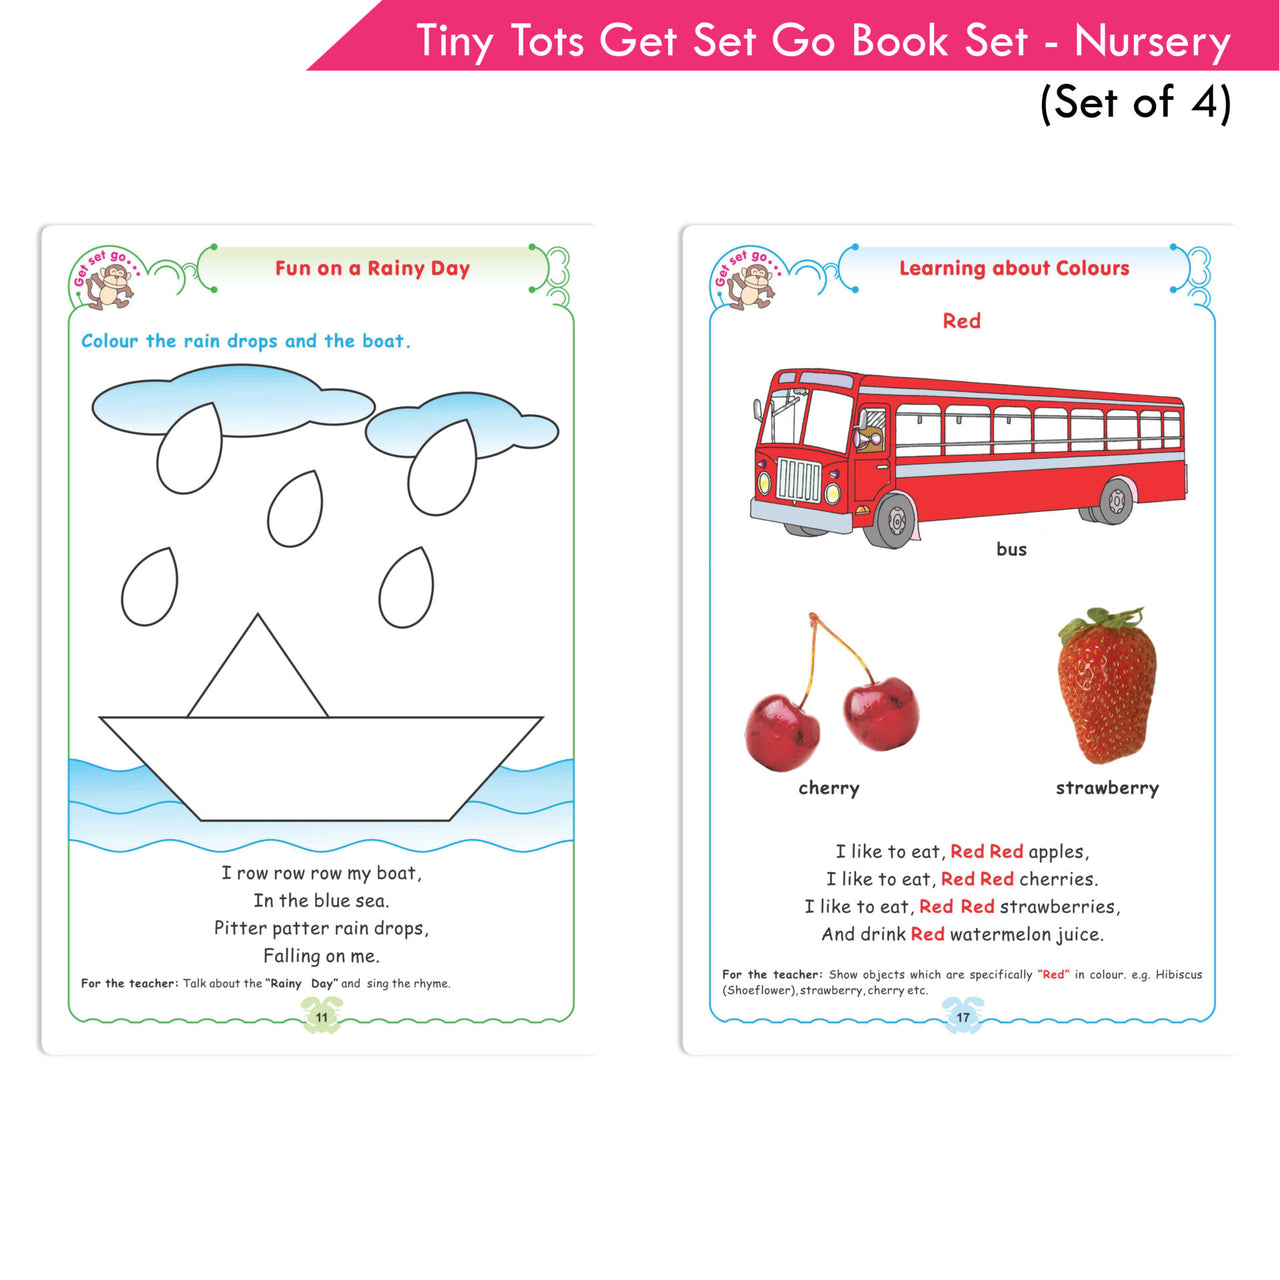 Tiny Tots Get Set Go Preschool Learning Nursery Books Set of 4| Term wise Education Books| Ages 3-4 Years - Distacart